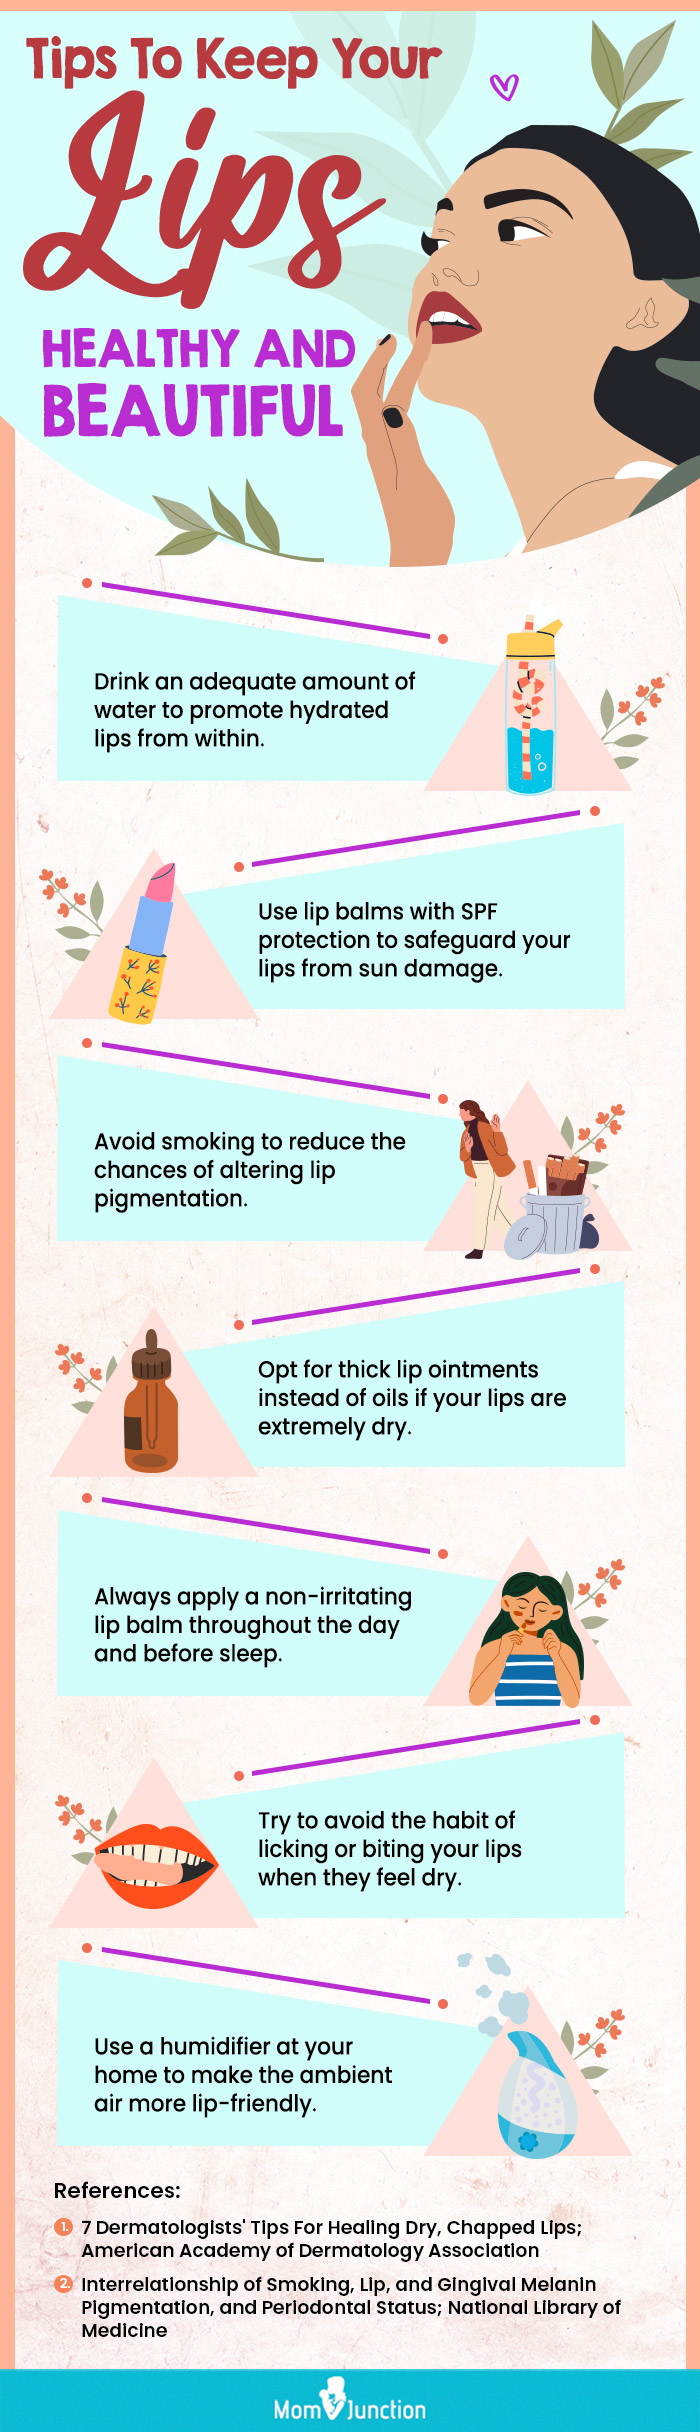 Tips-To-Keep-Your-Lips-Healthy-And-Beautiful (infographic)